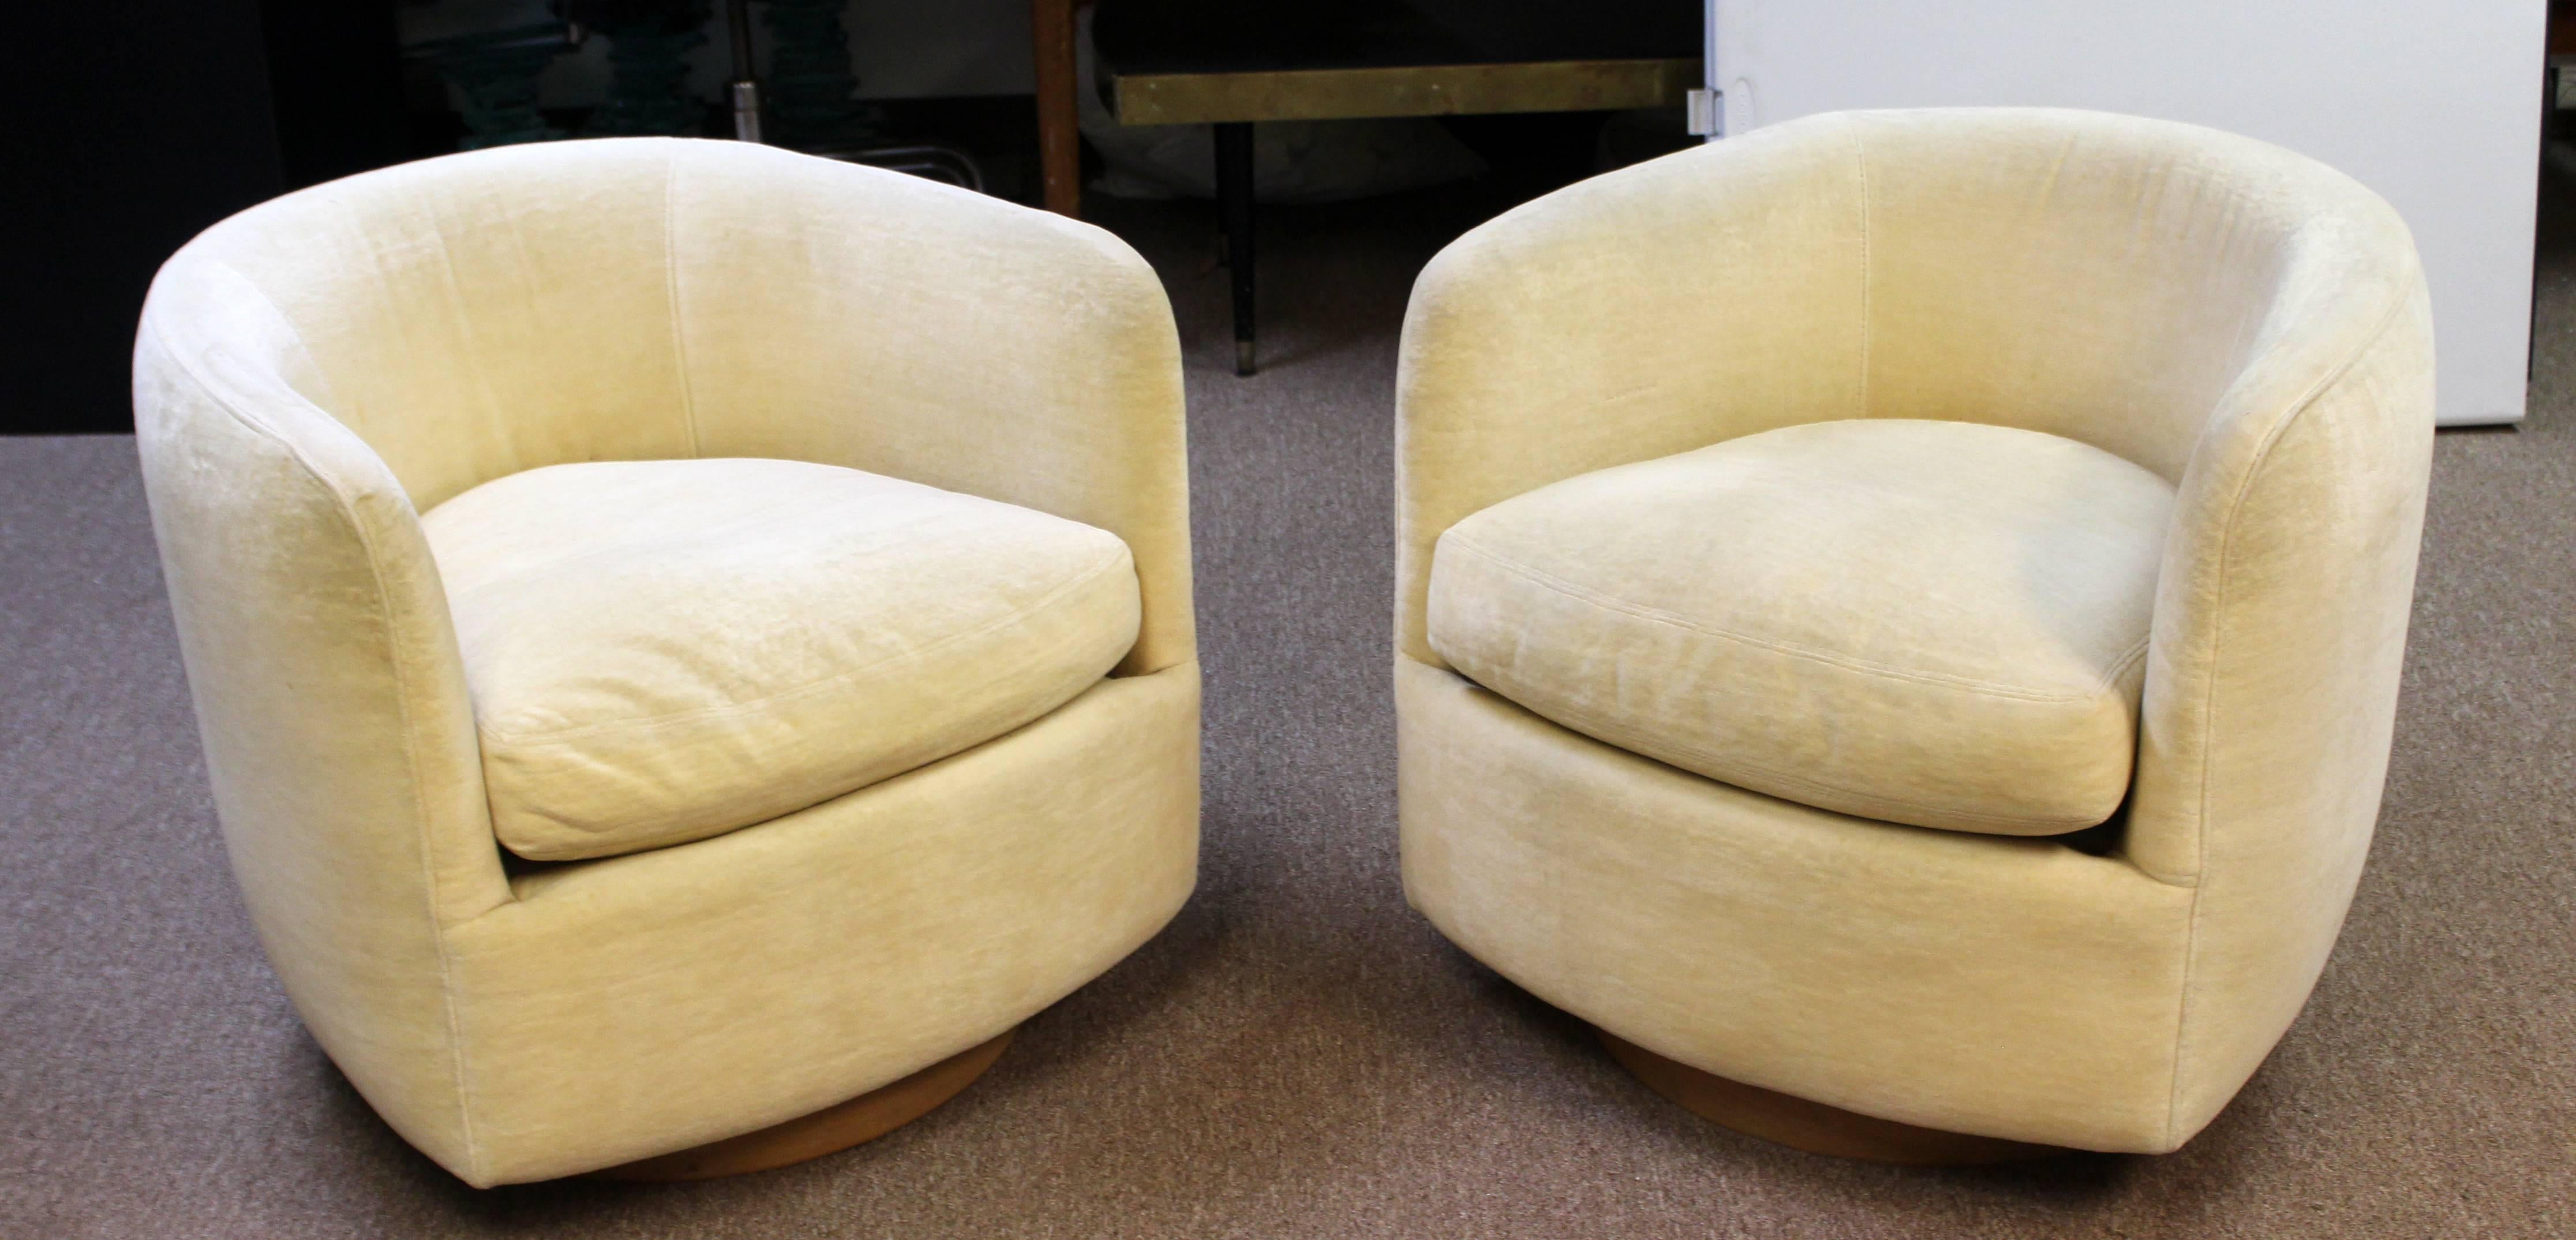 For your consideration is a an original pair of swivel tub chairs, on wood plinth bases, by Milo Baughman for Thayer Coggin. In great condition, but are in need of re-upholstery. The dimensions are 26